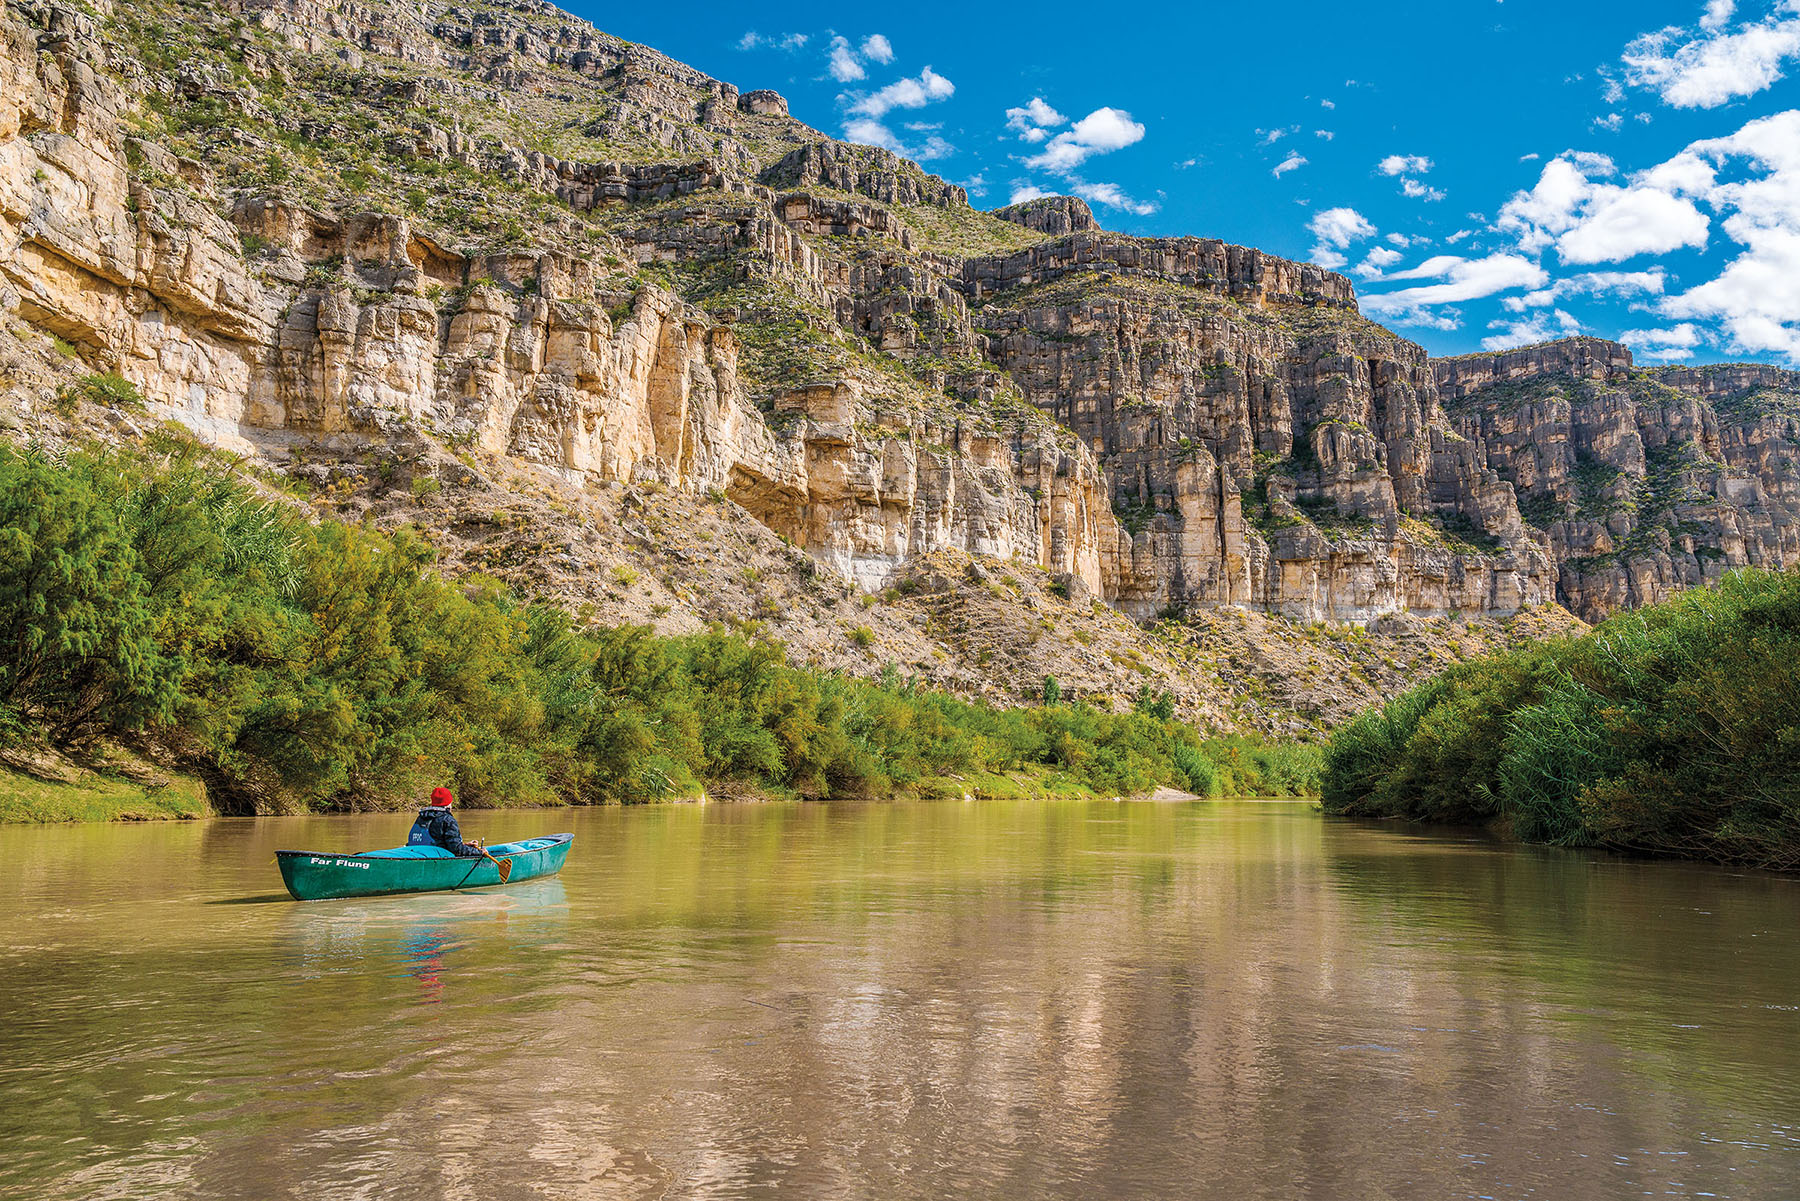 A teal canoe paddles between tall cliffs of the Rio Grande around Mile 737 in the Lower Canyons